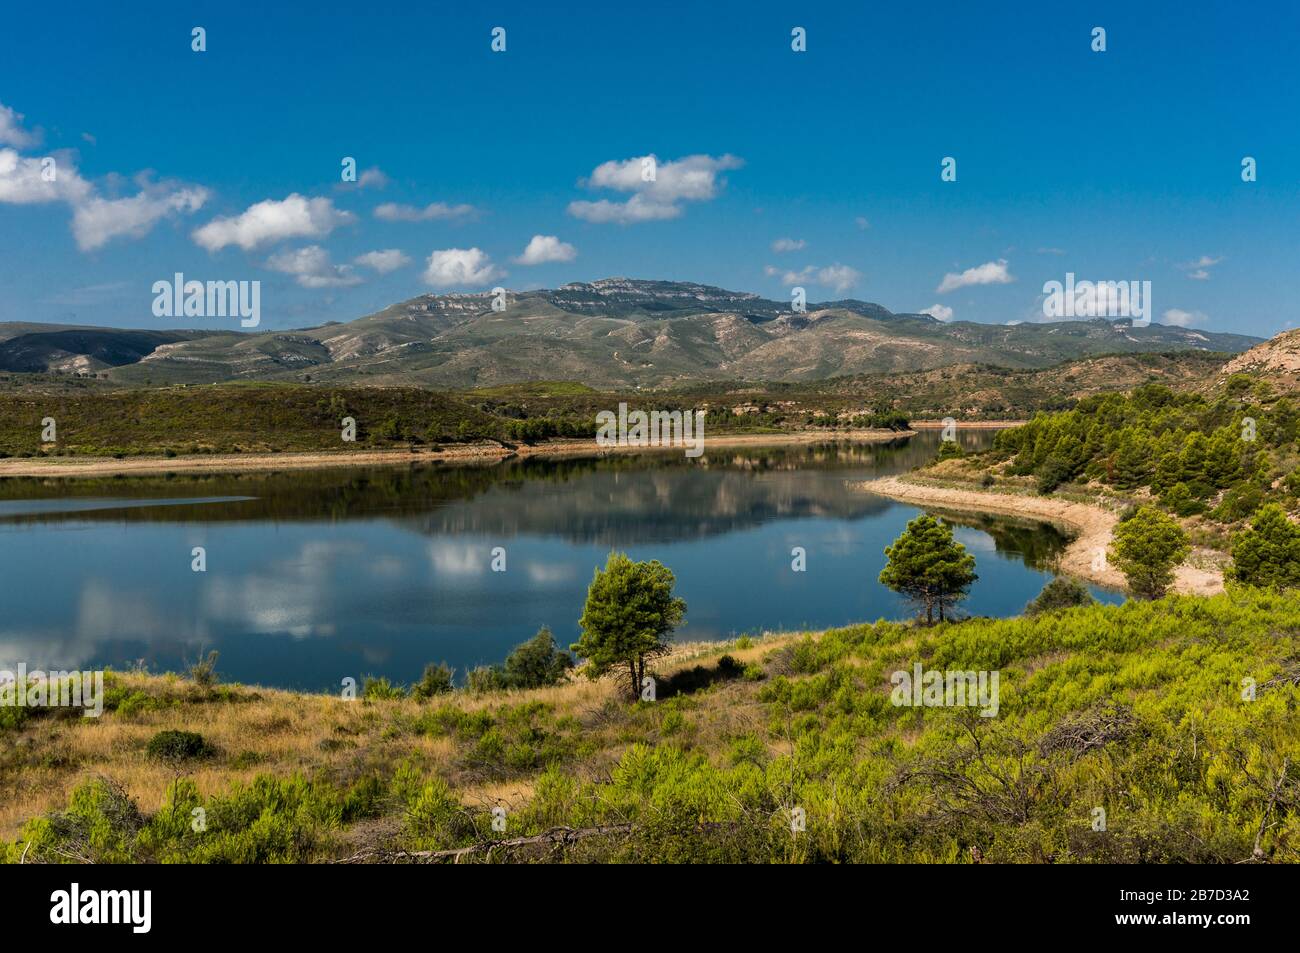 landscape of mountains with blue sky and clouds reflected in the water in Forata dam in Yátova (Valencia - Spain) Stock Photo